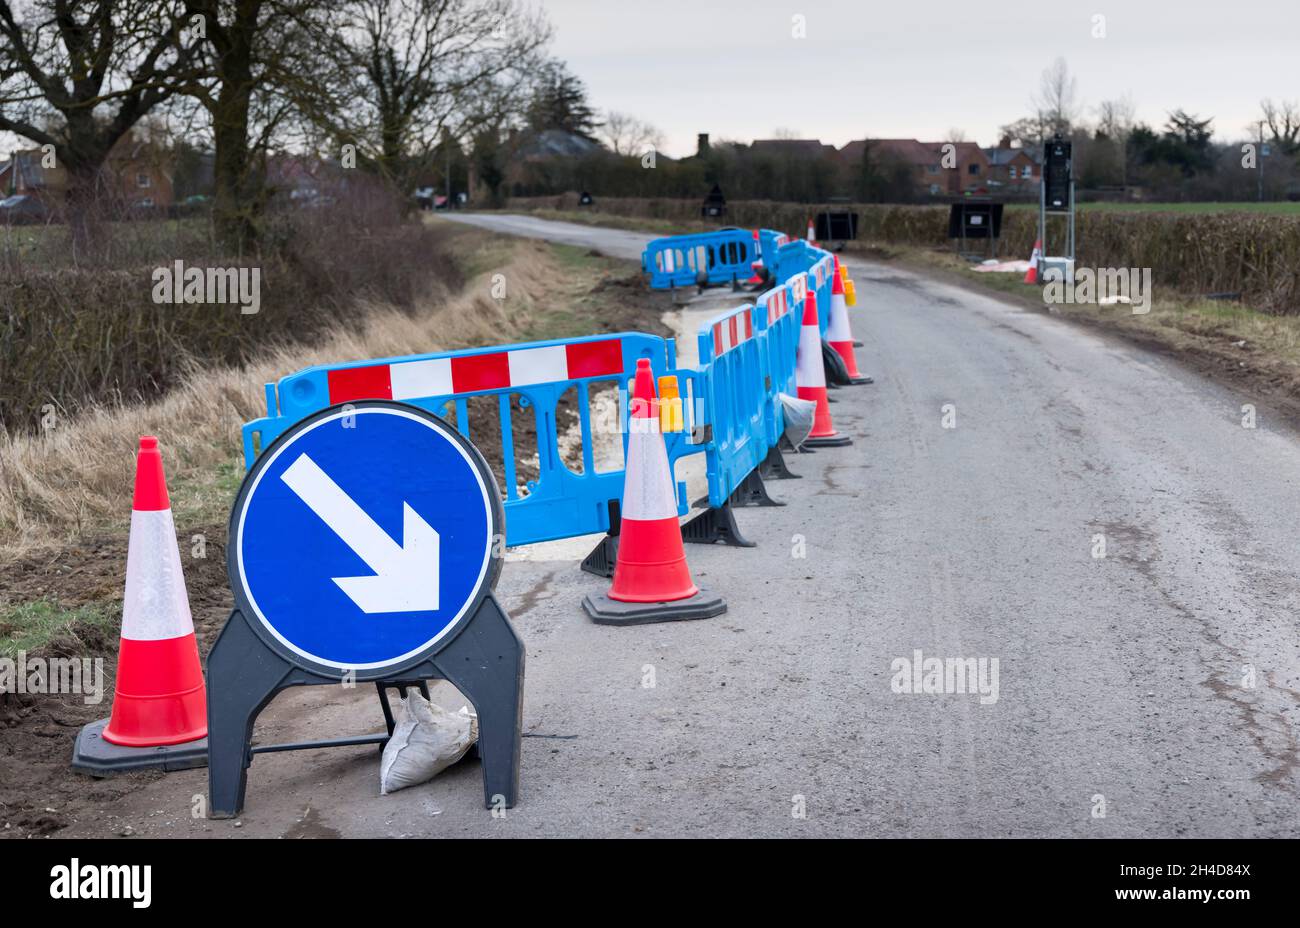 Roadworks with traffic cones and warning sign on a rural country road in Buckinghamshire, UK Stock Photo